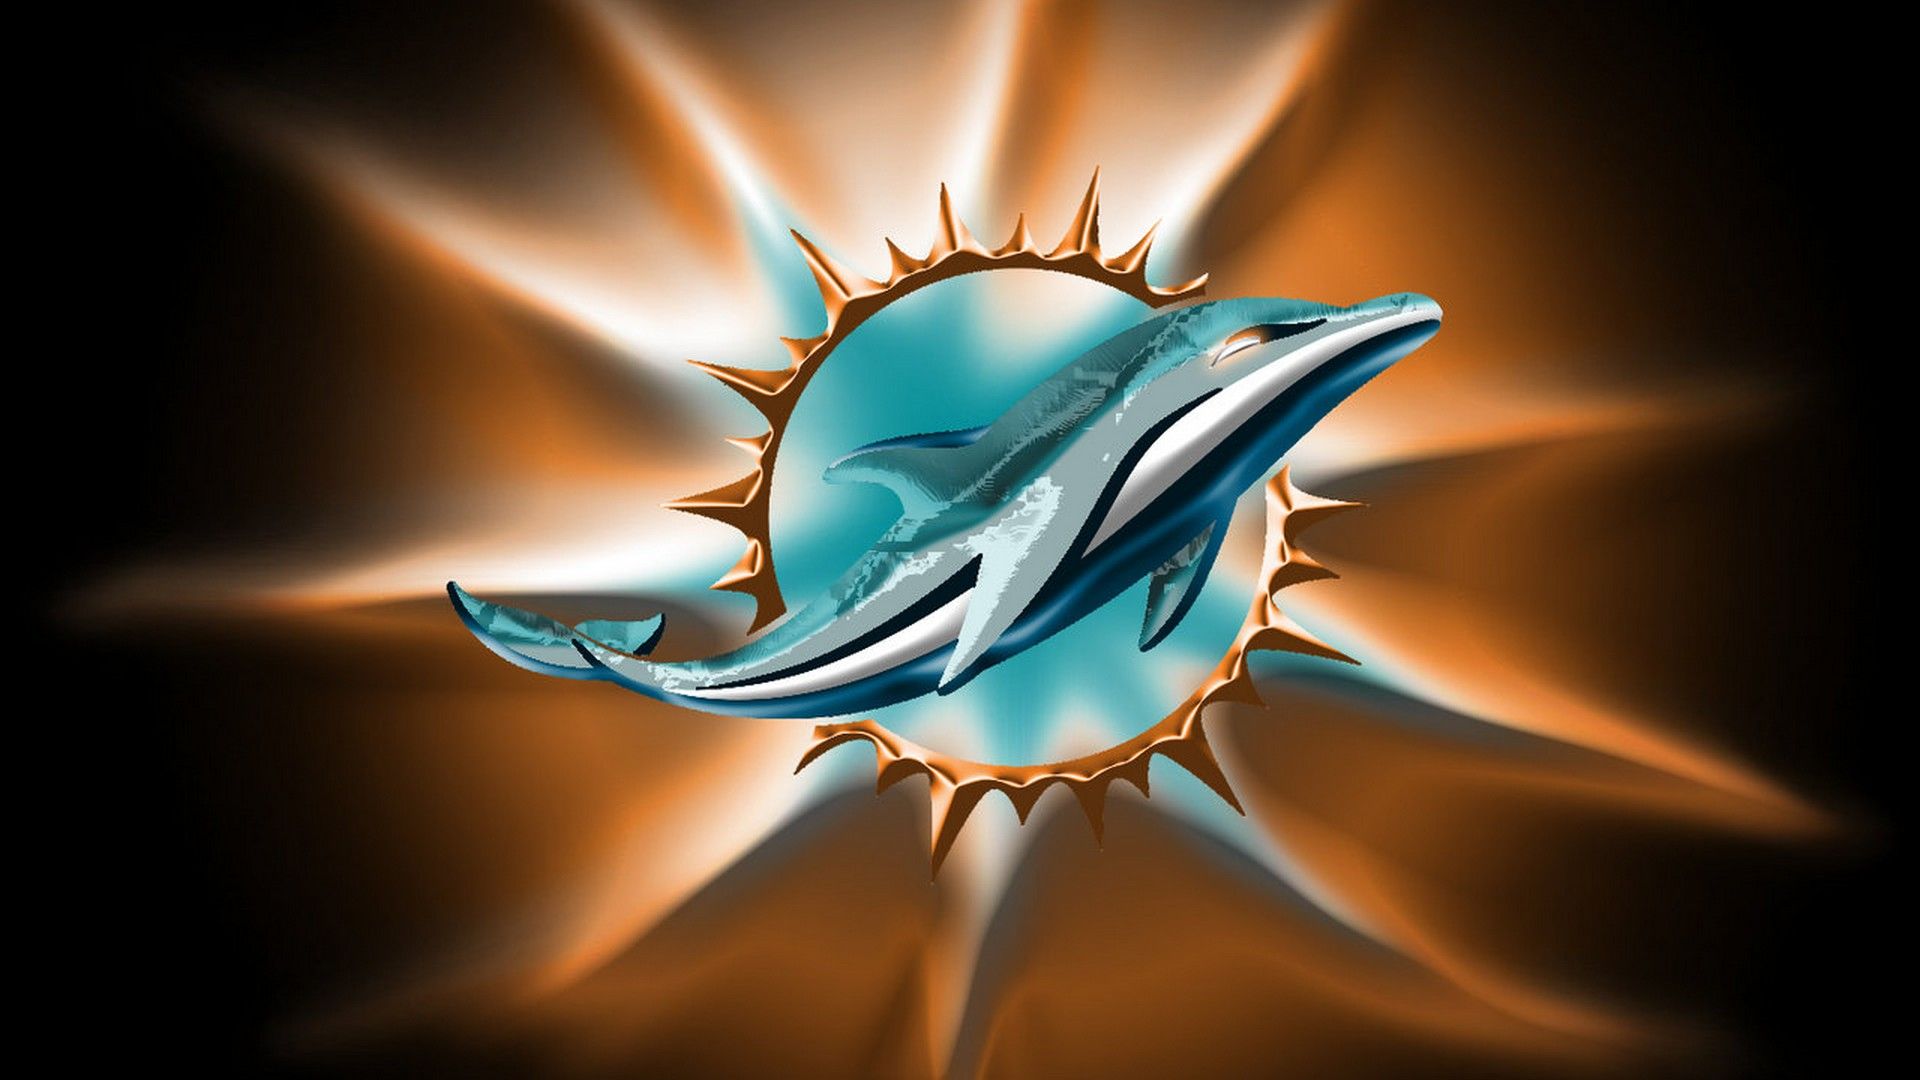 Miami Dolphins Background HD NFL Football Wallpaper. Miami dolphins, Miami dolphins wallpaper, Miami dolphins logo